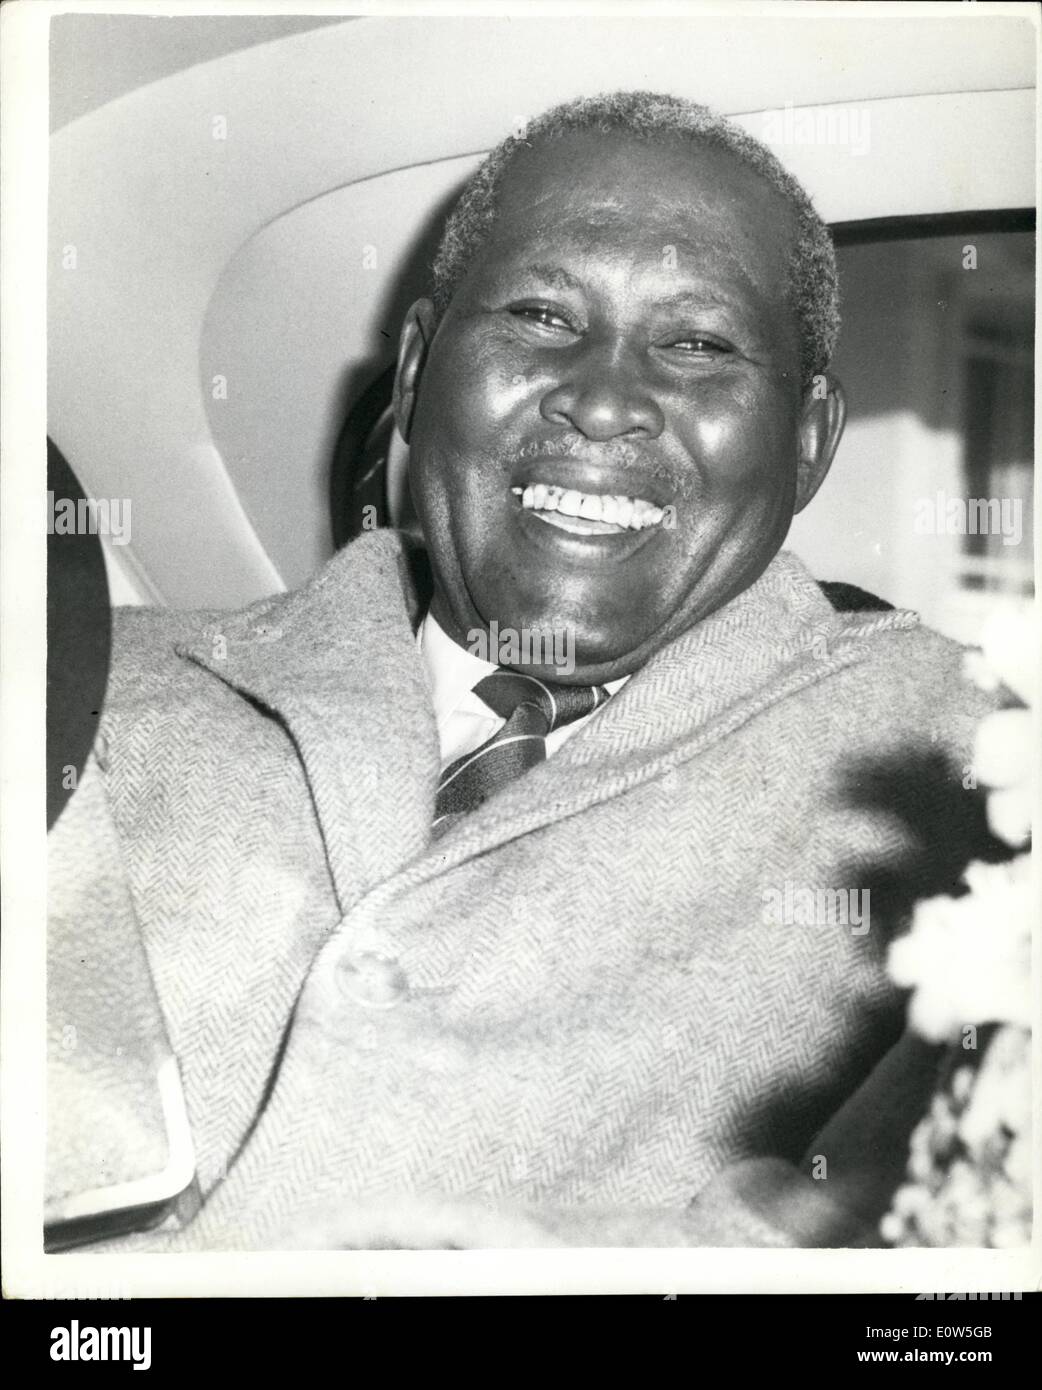 Jul. 07, 1961 - Zulu Chief Who Won Nobel Prize Passes Through London for Oslo. Zulu Chief Albert Lutuli and his wife, from South Africa, passed through London on their way to Oslo where he is to be presented with the Nobel Peace Prize. Photo Shows: Chief Lutuli leaving the Dorchester Hotel by car on his way to London airport this morning. Stock Photo